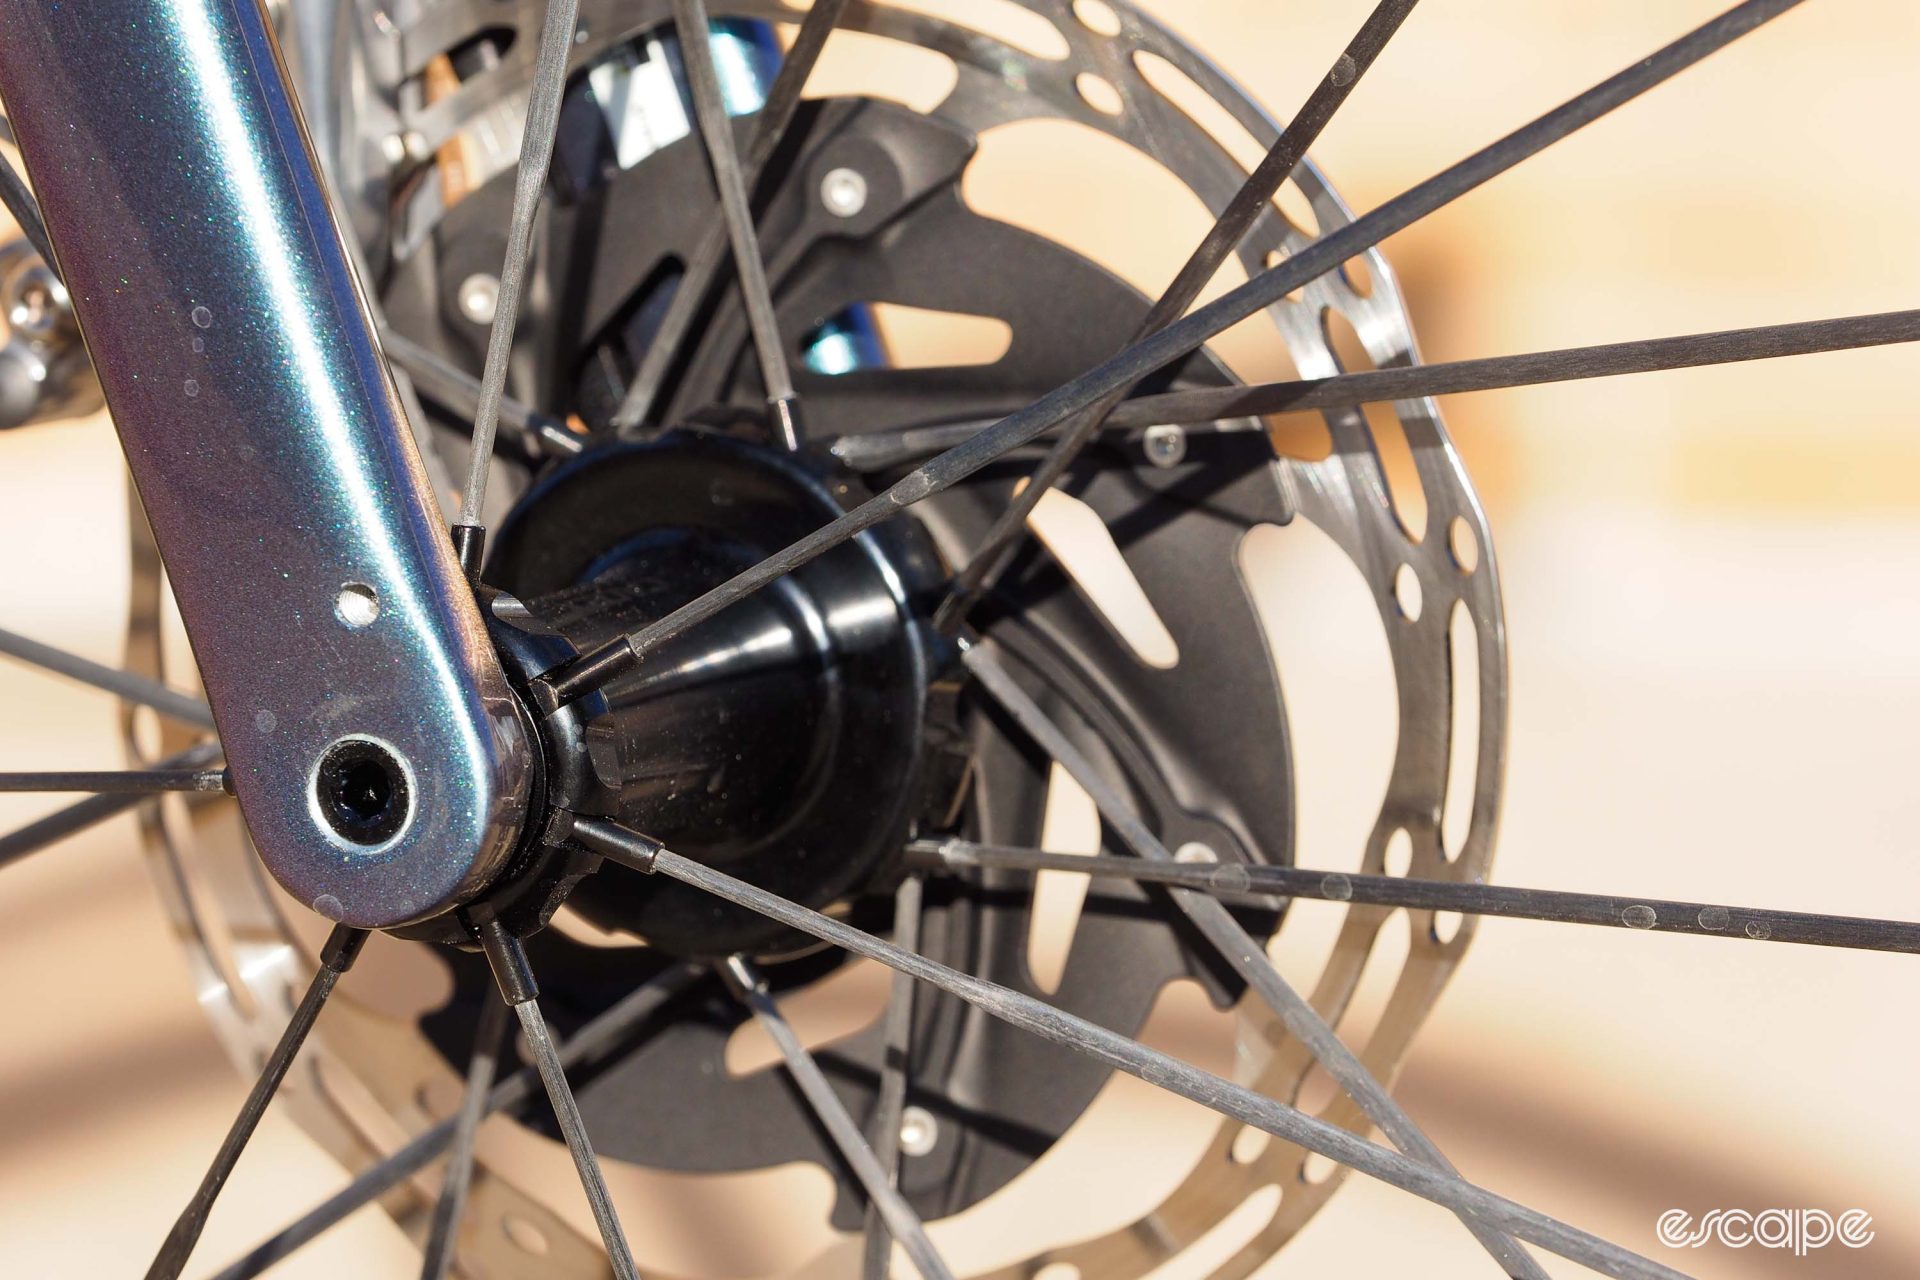 A closeup of the hub, showing bladed carbon-fiber spokes seated to aluminum inserts on the hub shell.